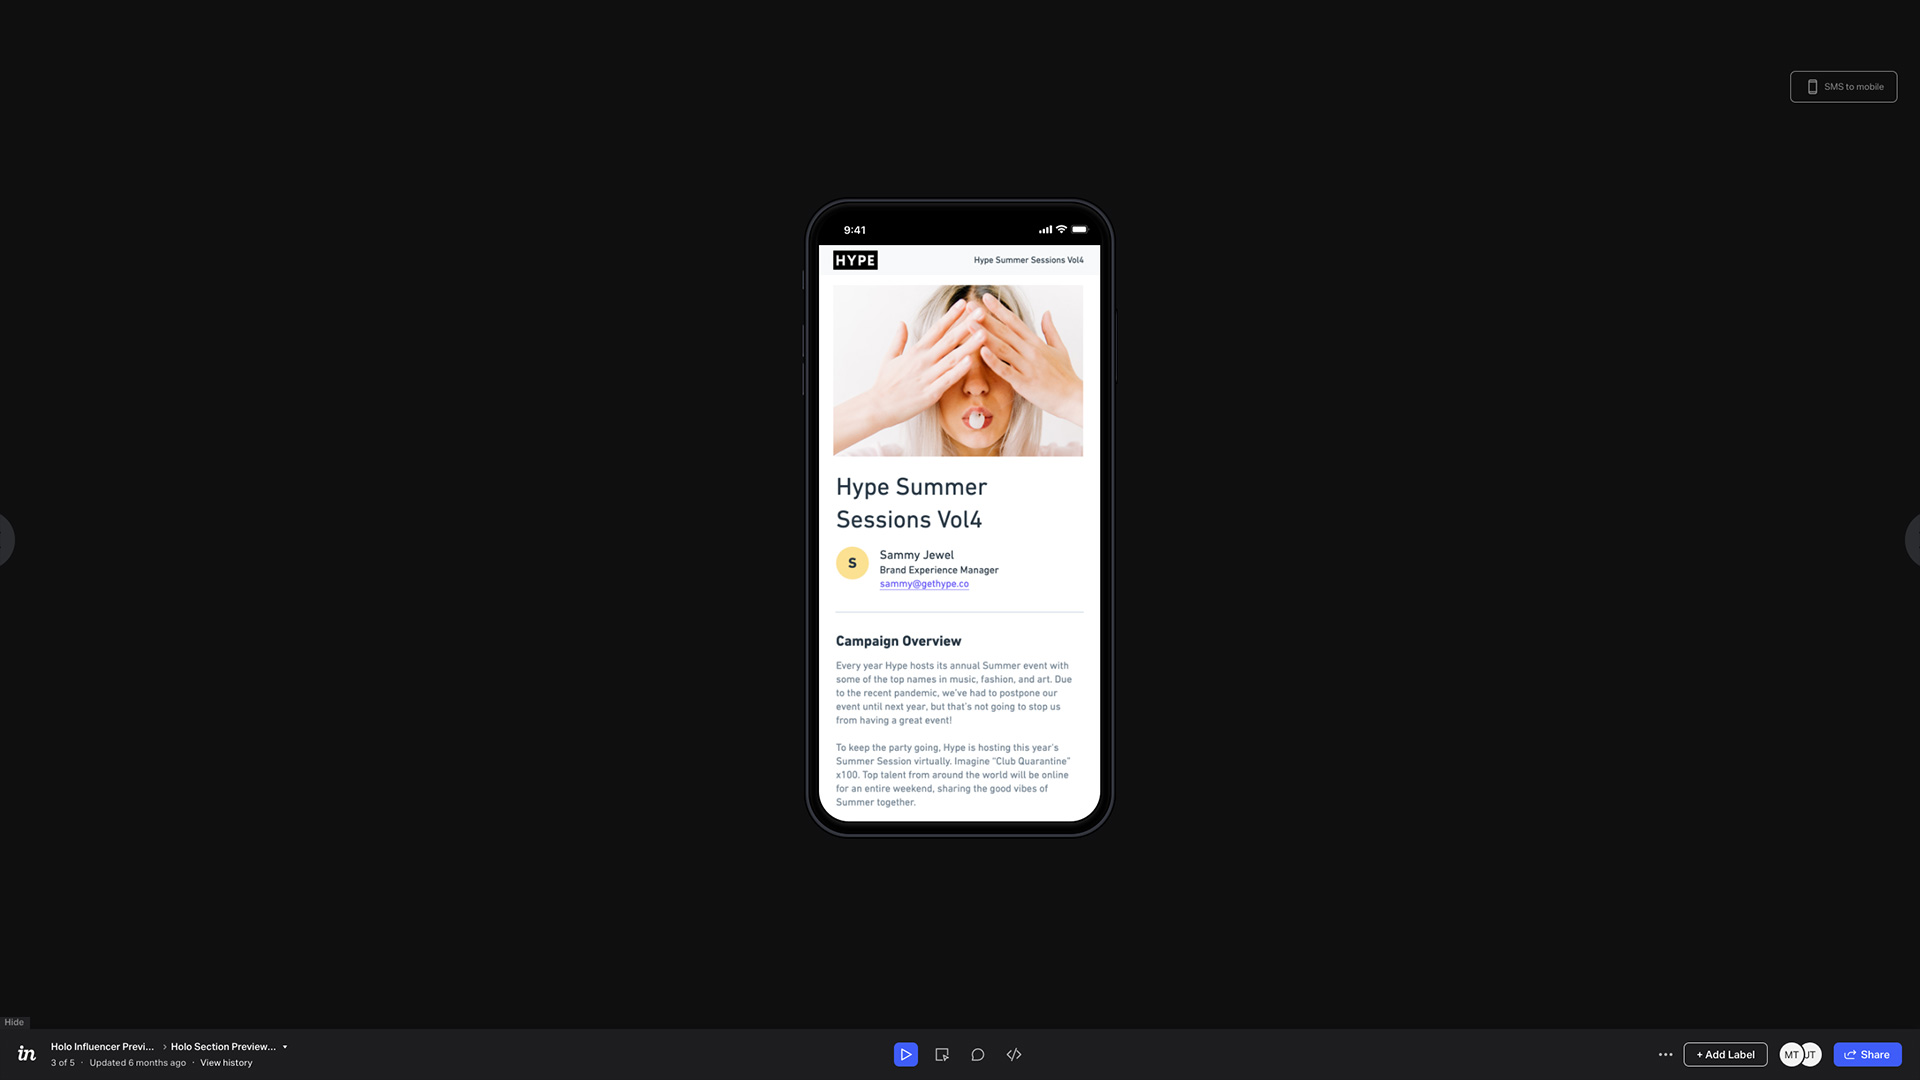 mobile-first prototype of influencer view